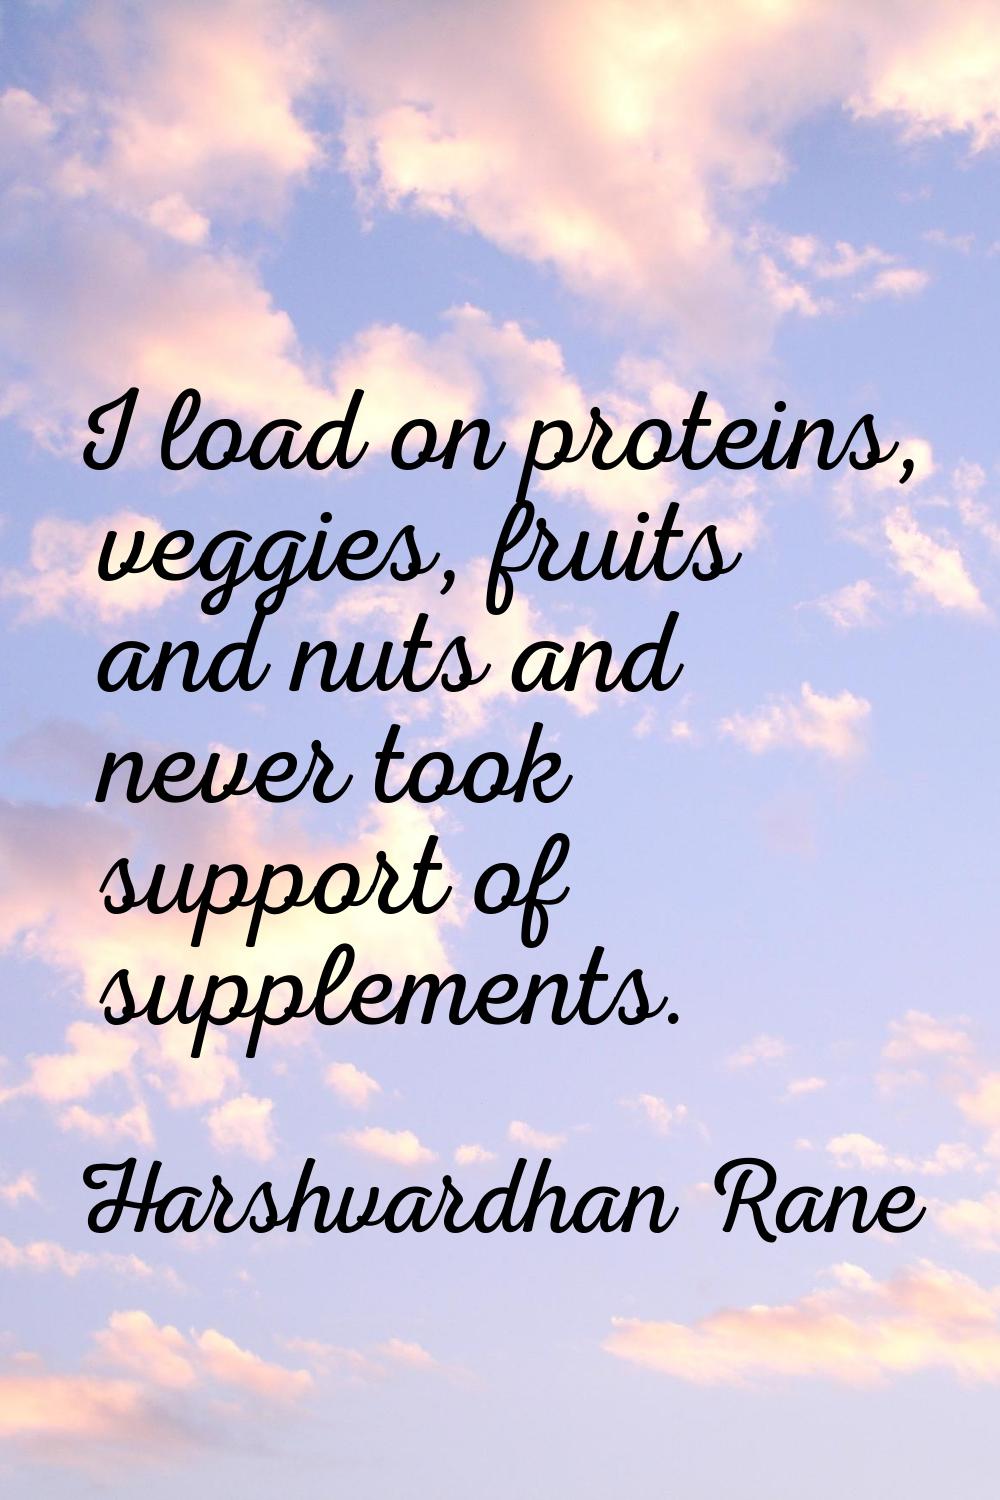 I load on proteins, veggies, fruits and nuts and never took support of supplements.